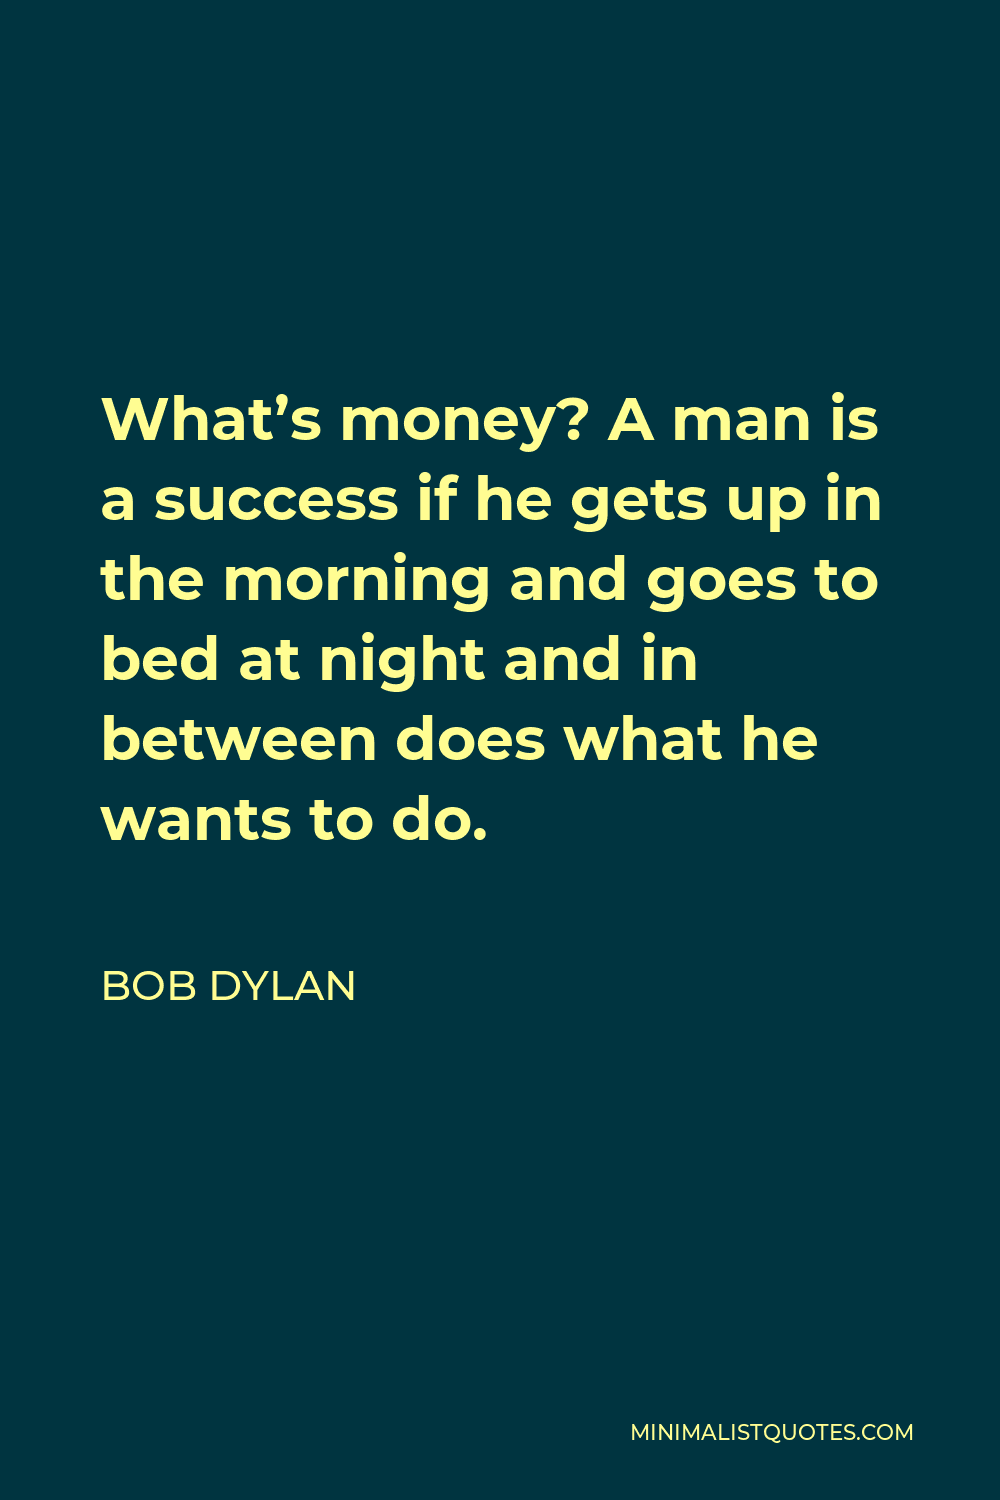 Bob Dylan Quote - What’s money? A man is a success if he gets up in the morning and goes to bed at night and in between does what he wants to do.